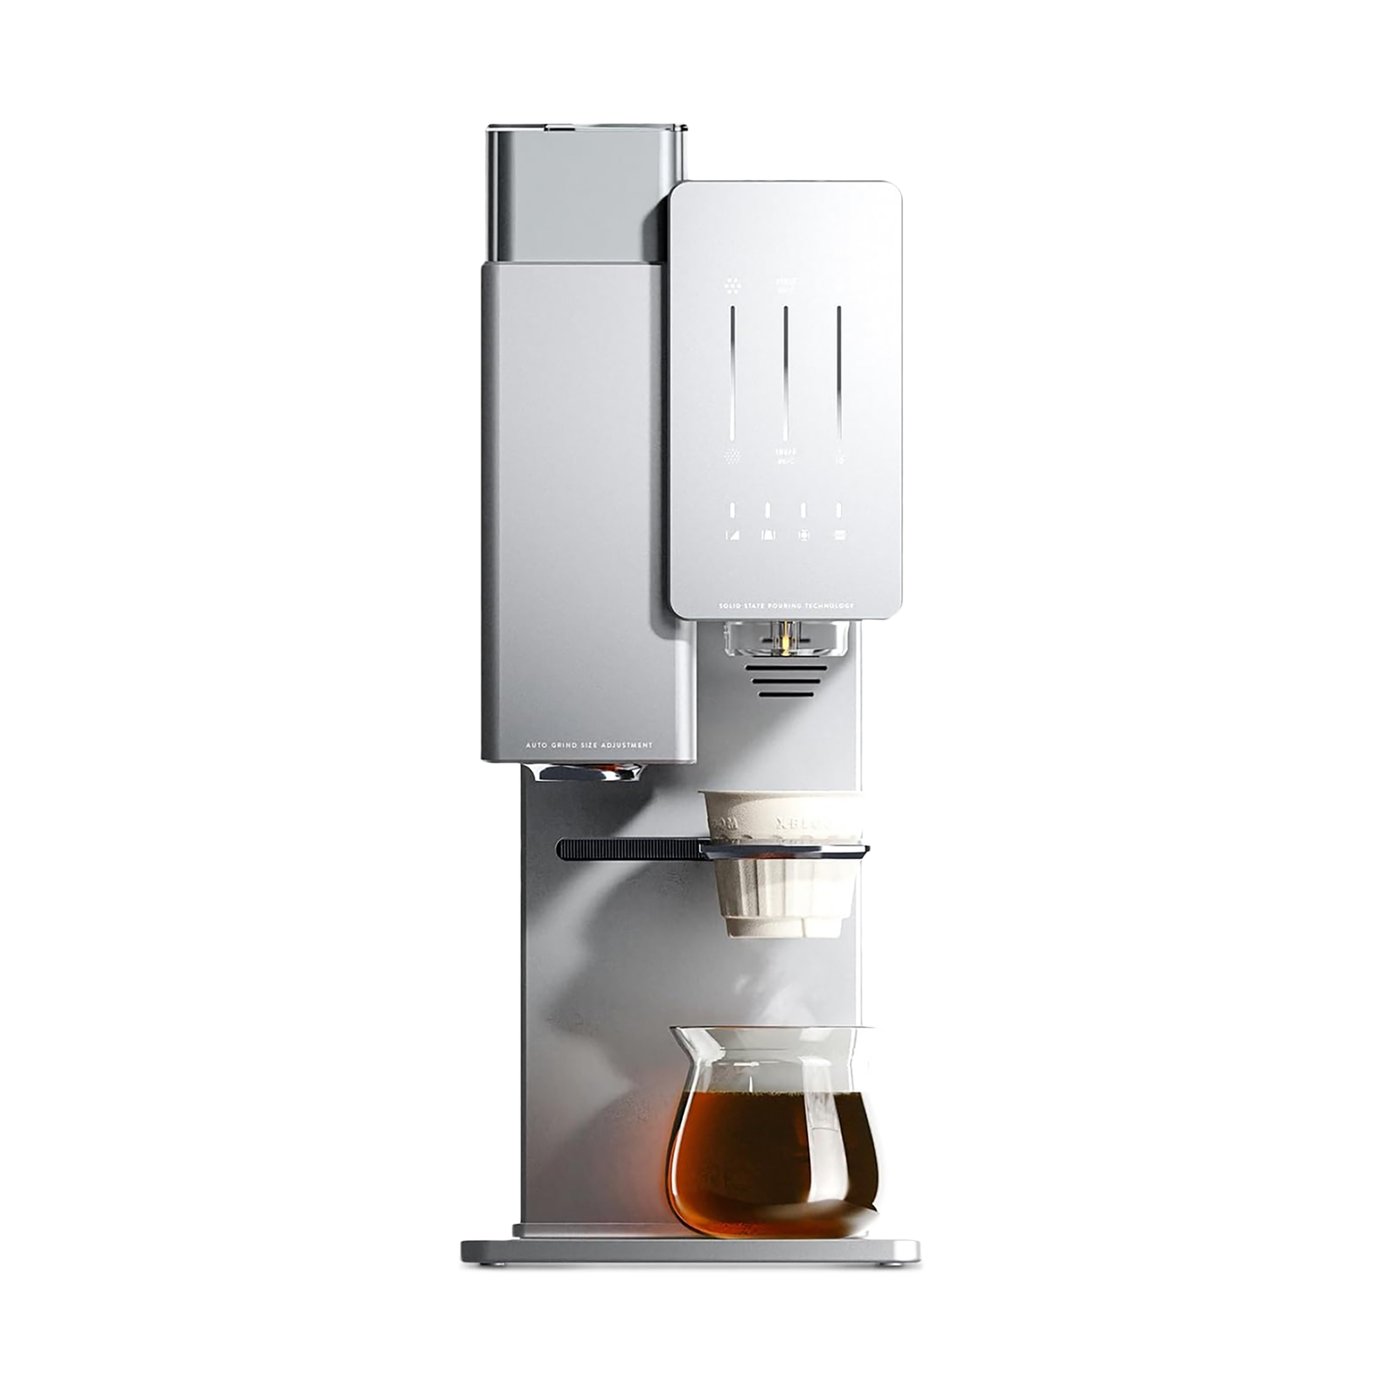 Full-automatic Coffee Machine Commercial/Household Coffee Maker